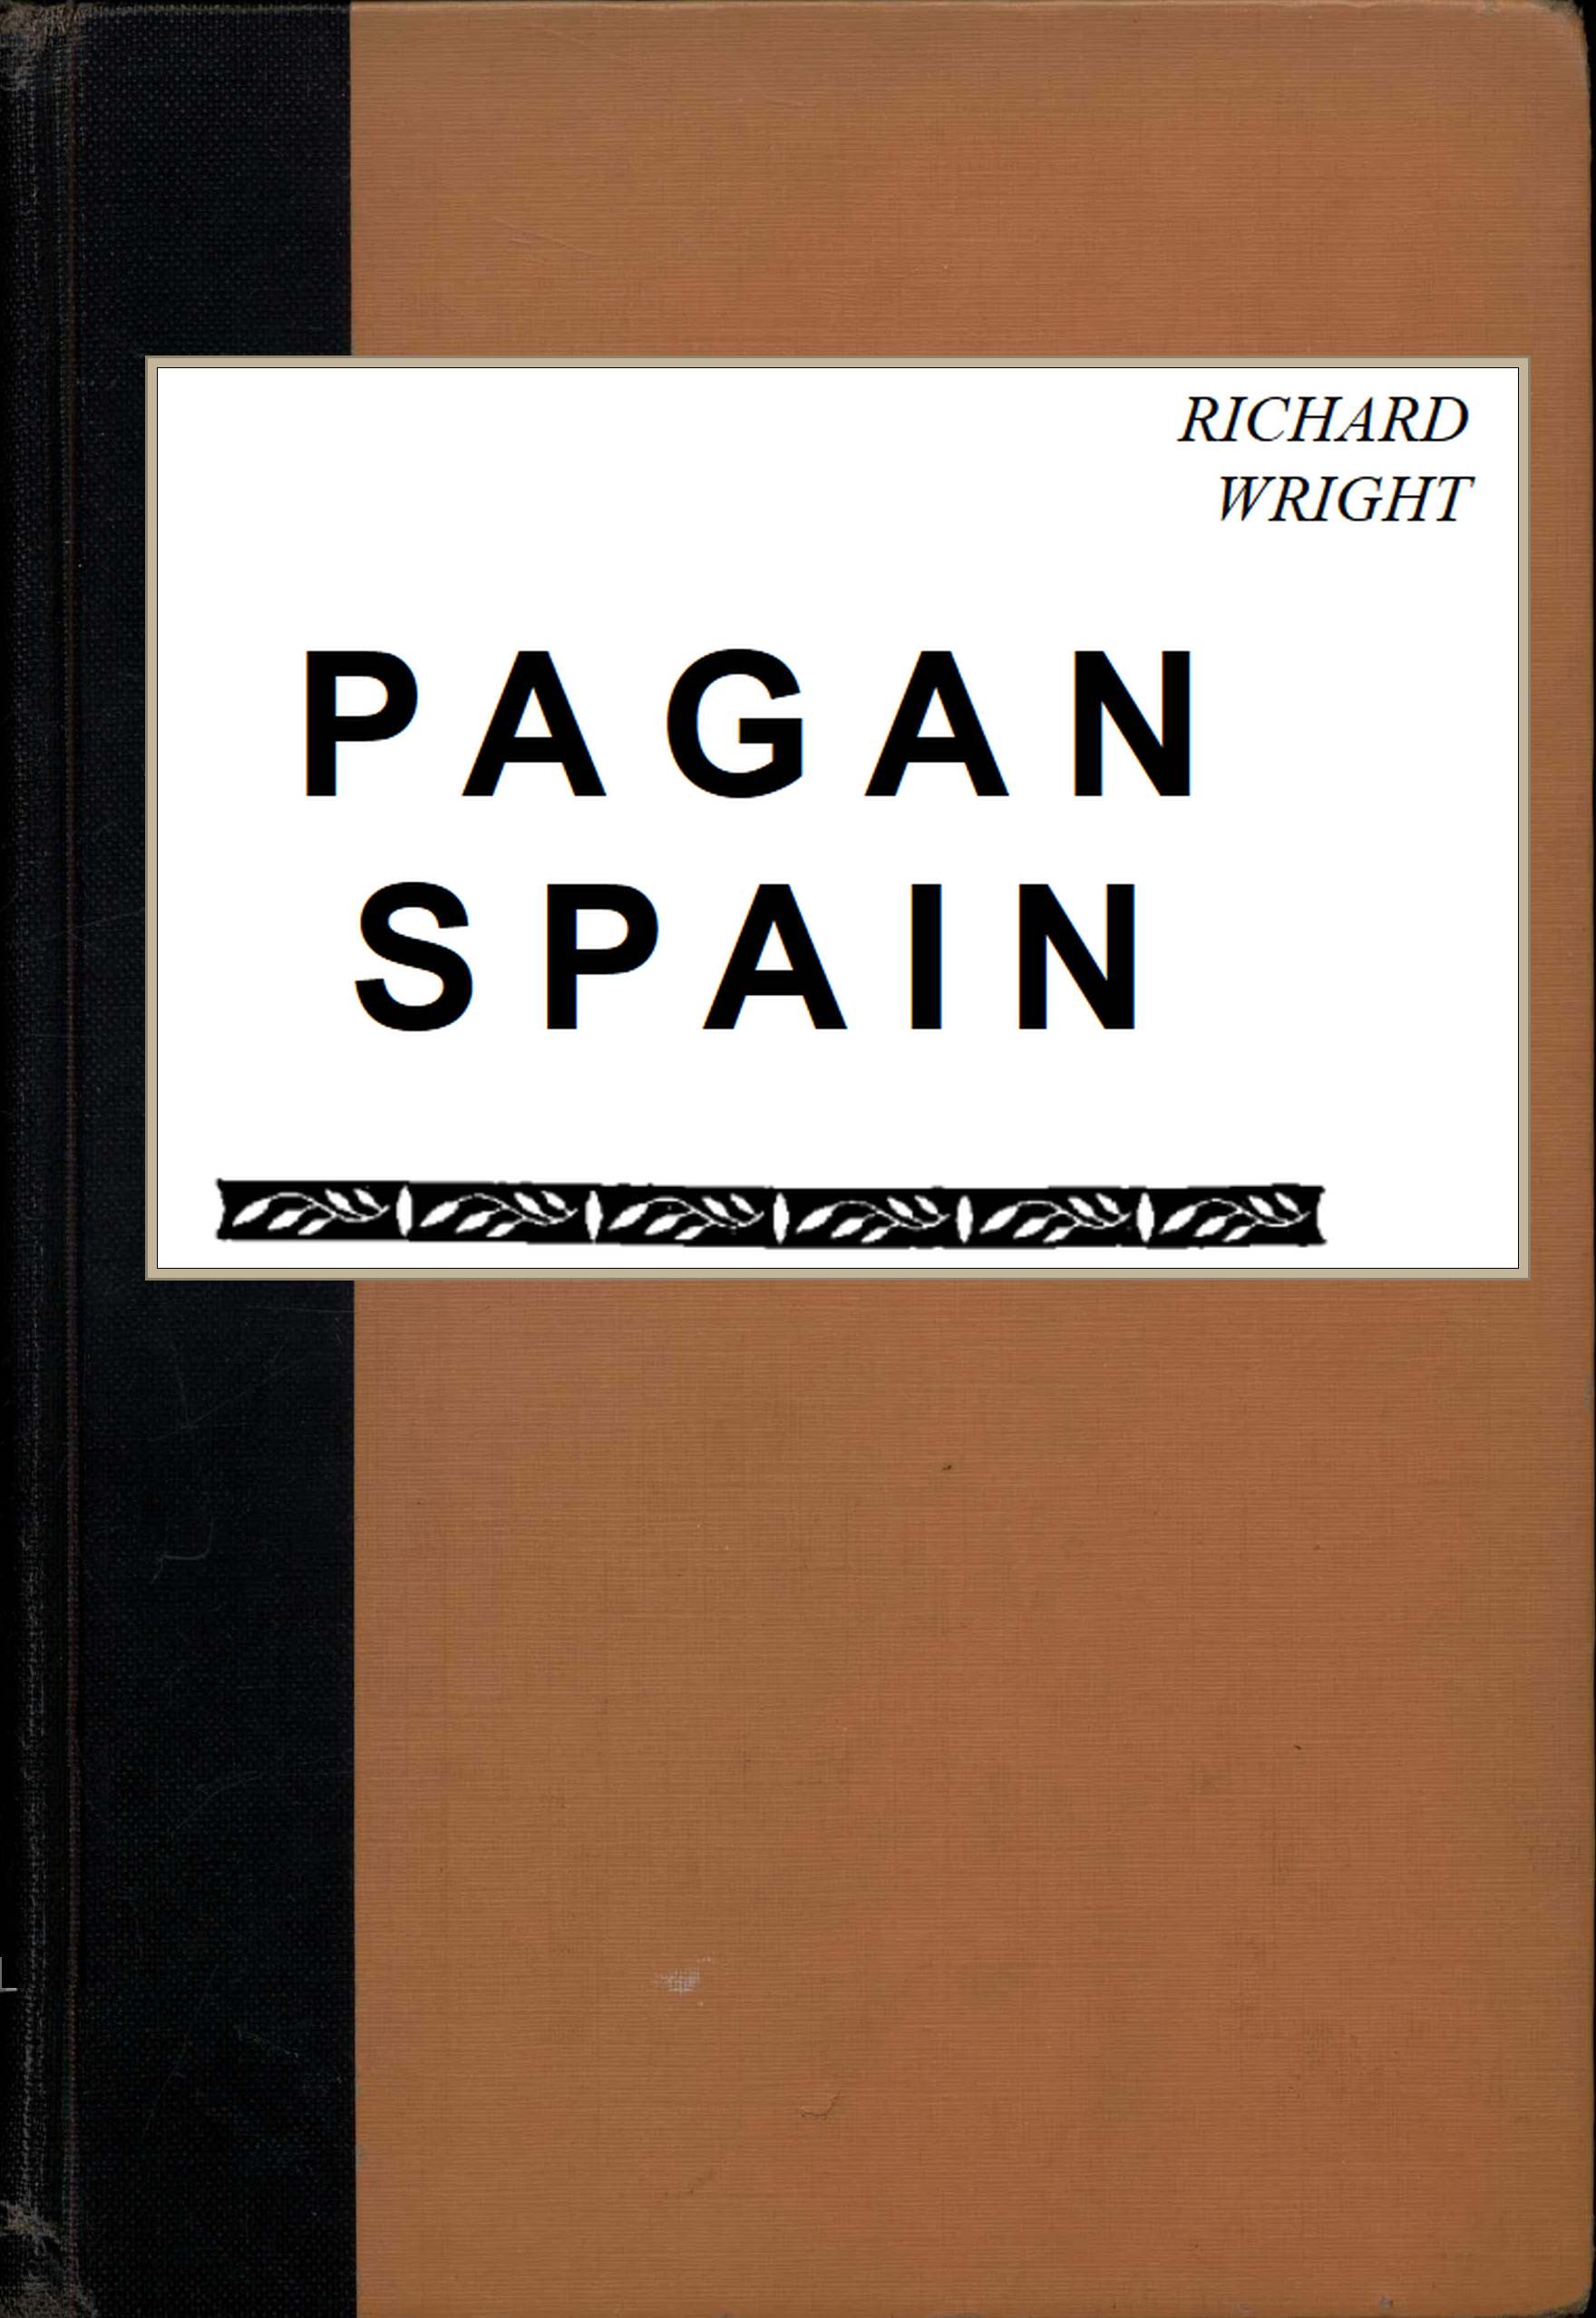 The Distributed Proofreaders Canada eBook of Pagan Spain, By